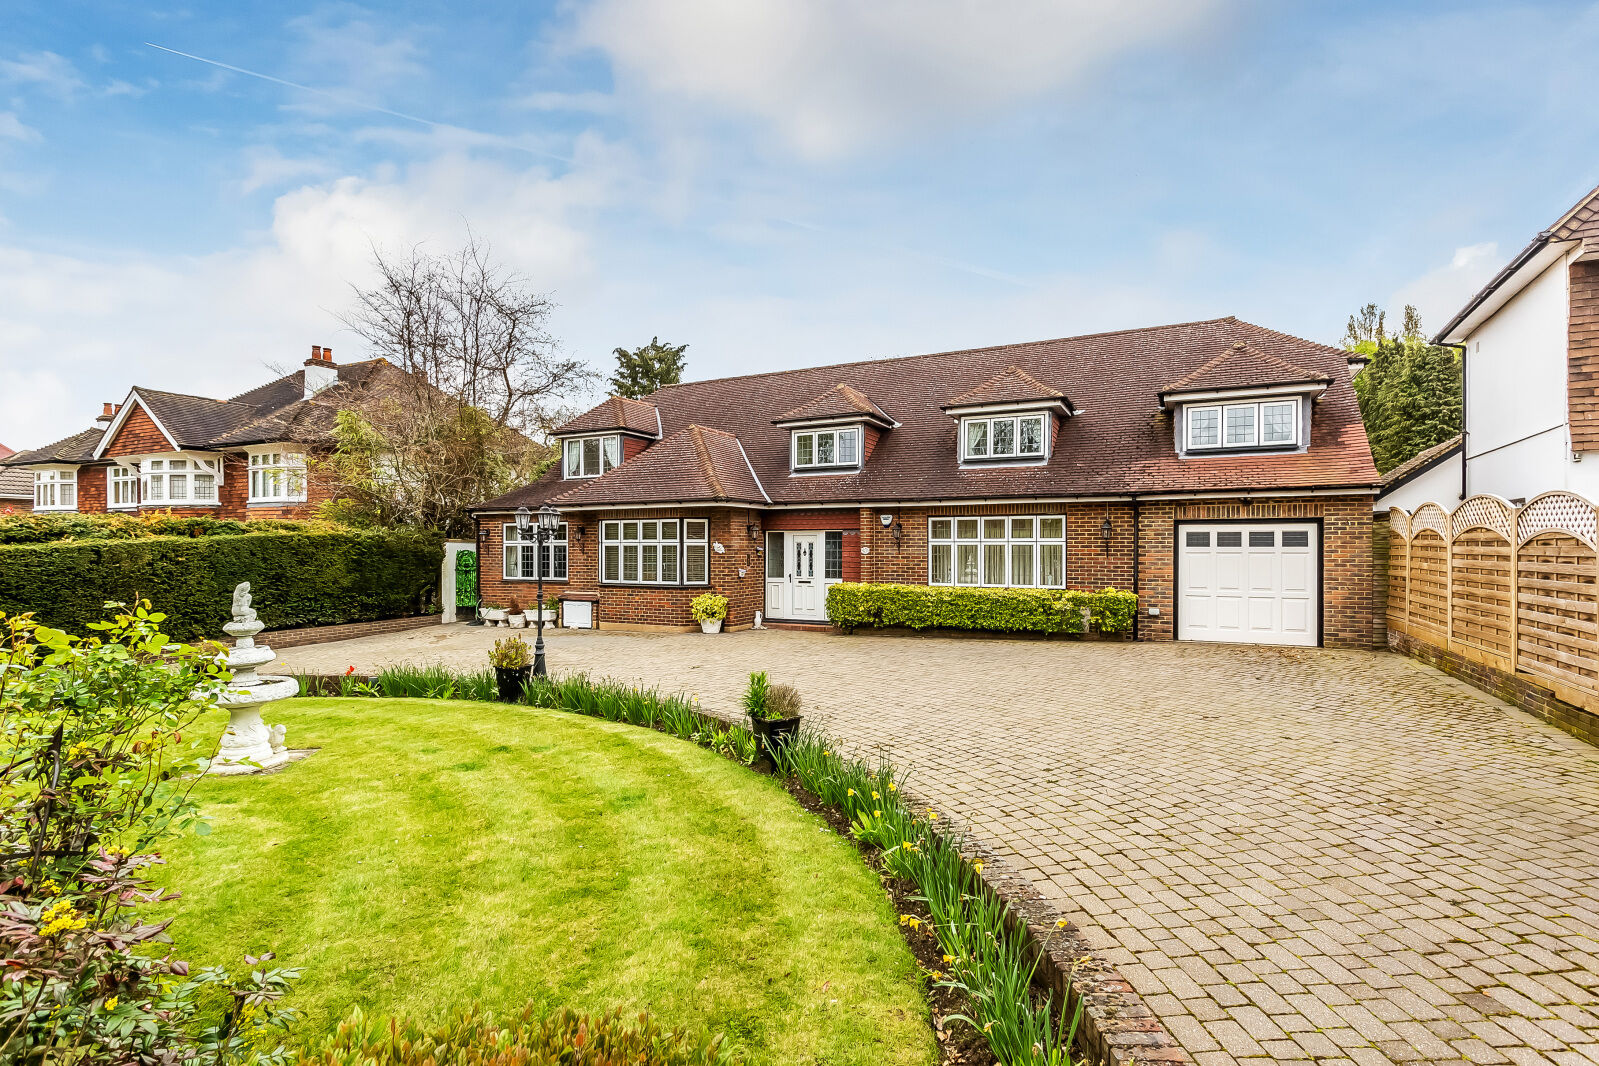 4 bedroom detached house for sale The Highway, South Sutton, SM2, main image